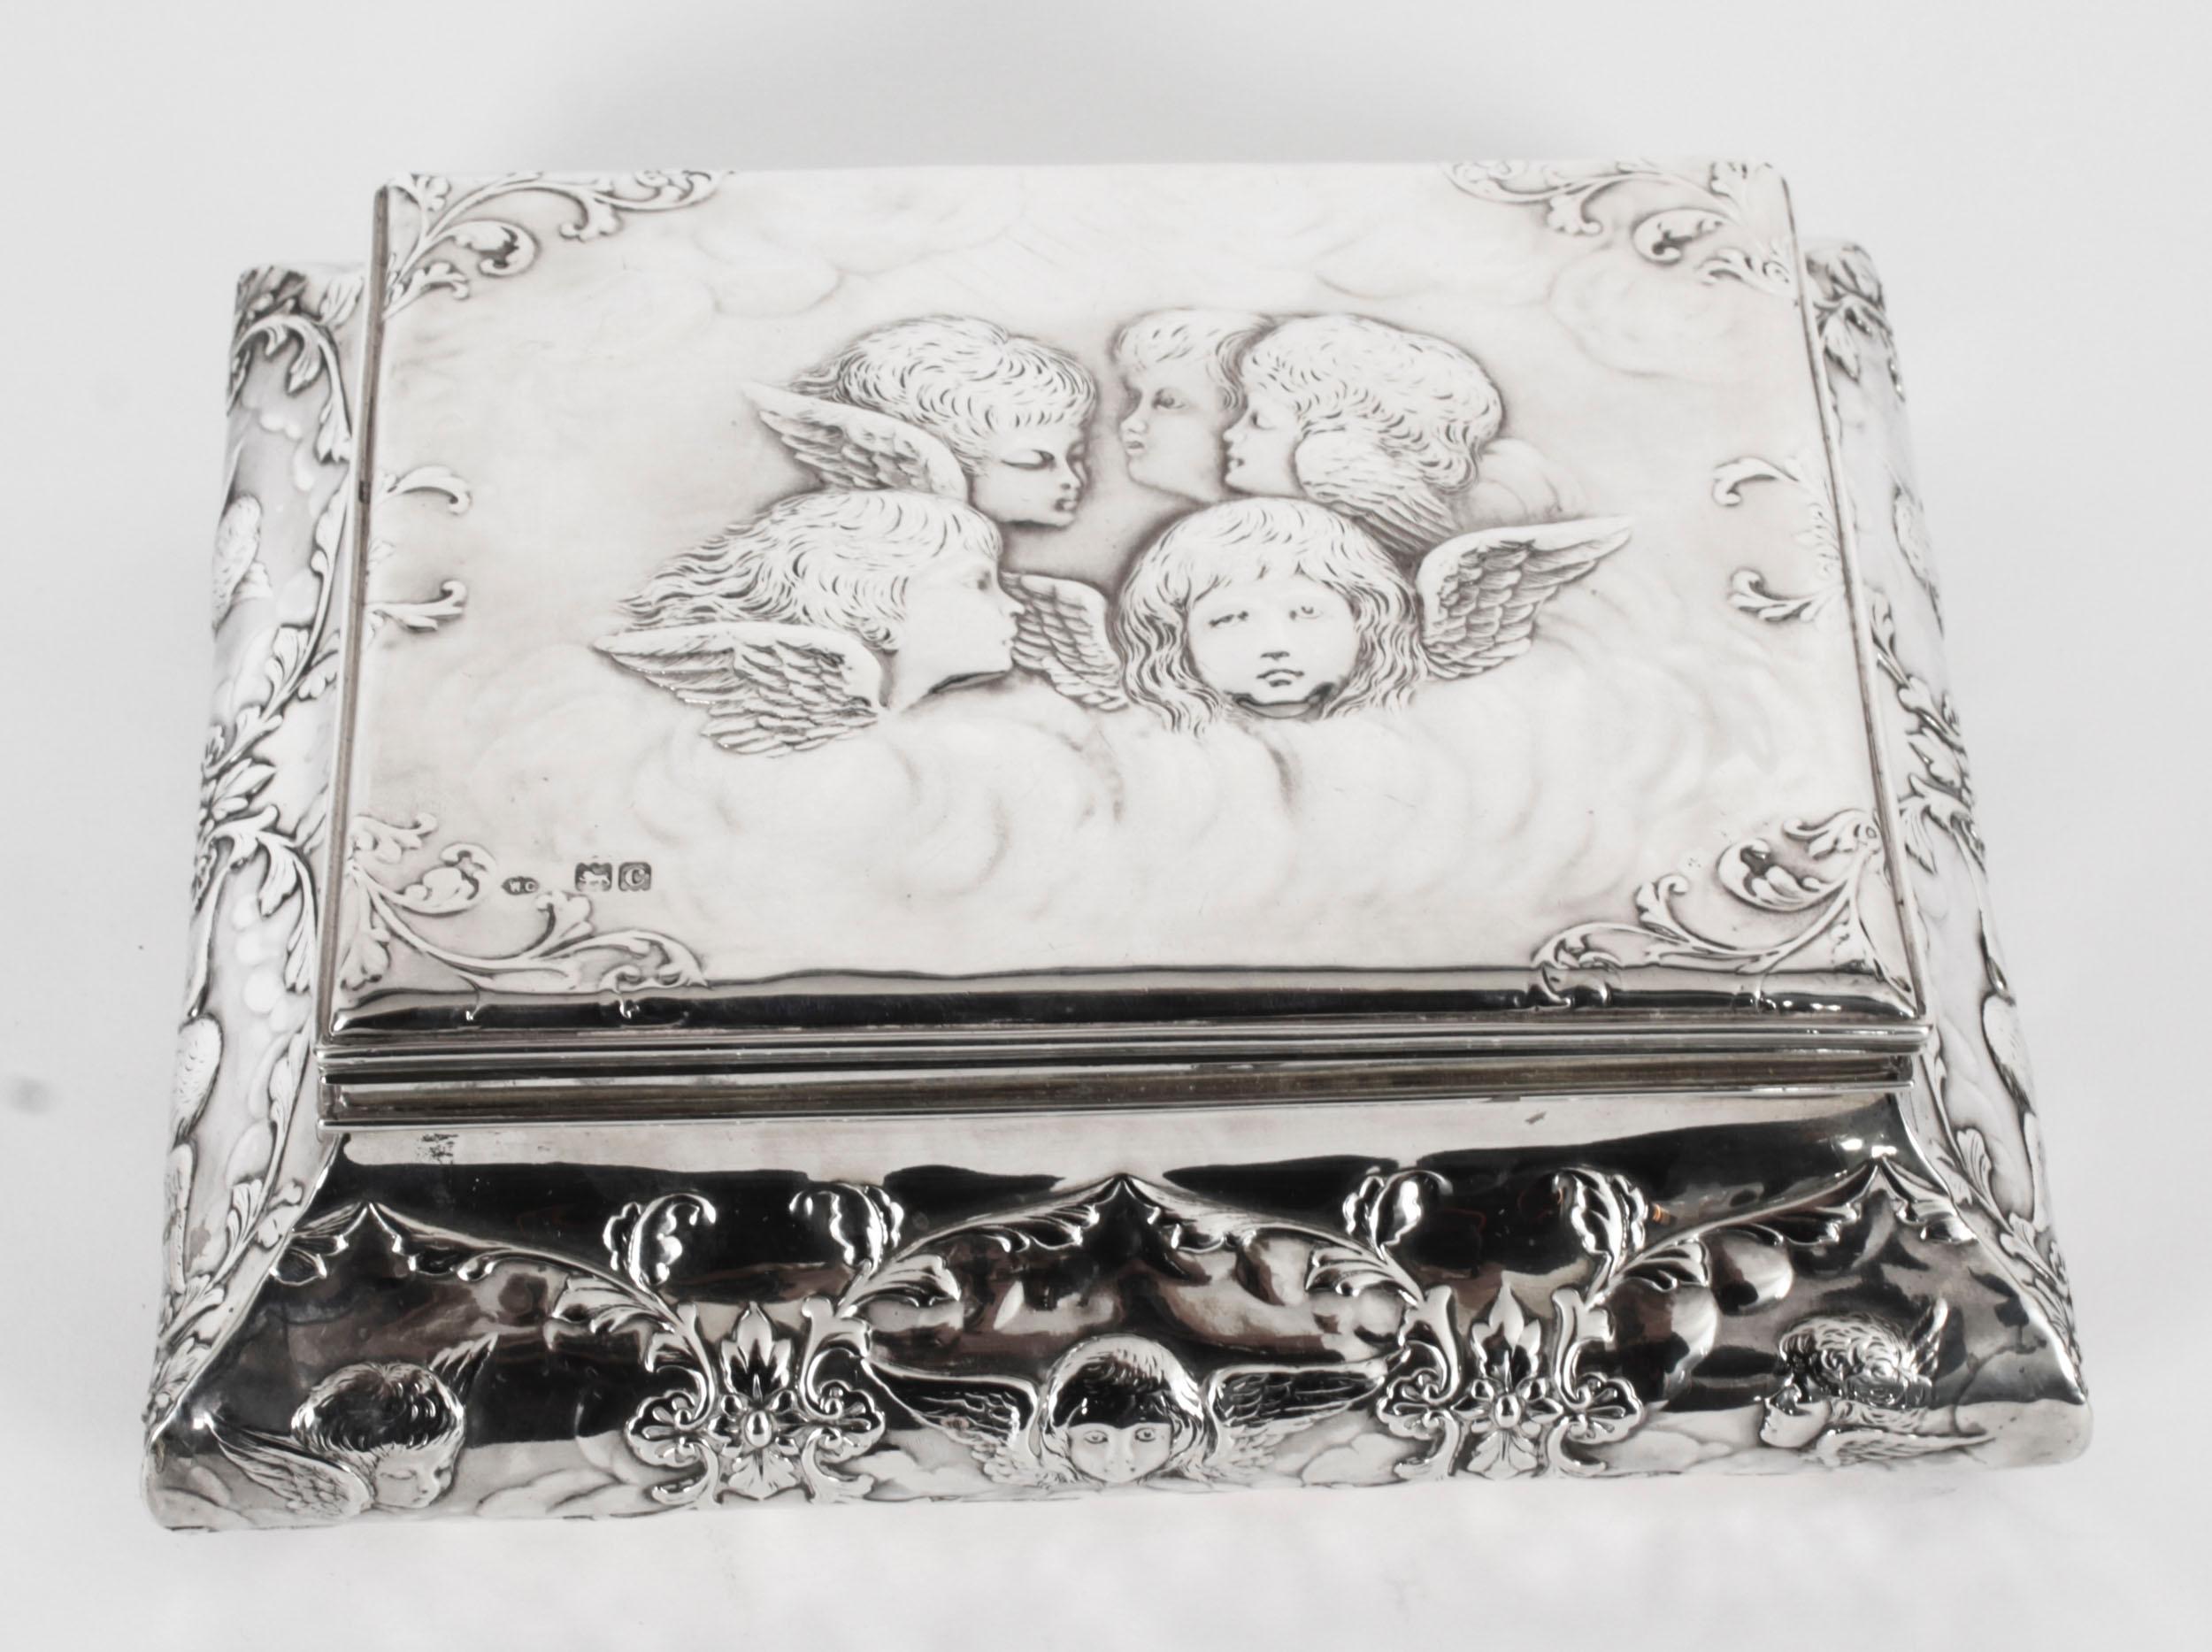 This is an elegant antique Victorian sterling silver casket with hallmarks for London, 1898 and the makers marks of the renowned silversmith William Comyns & Sons.

The shaped casket feaures a hinged cover with repousse Reynolds Angels portrait and